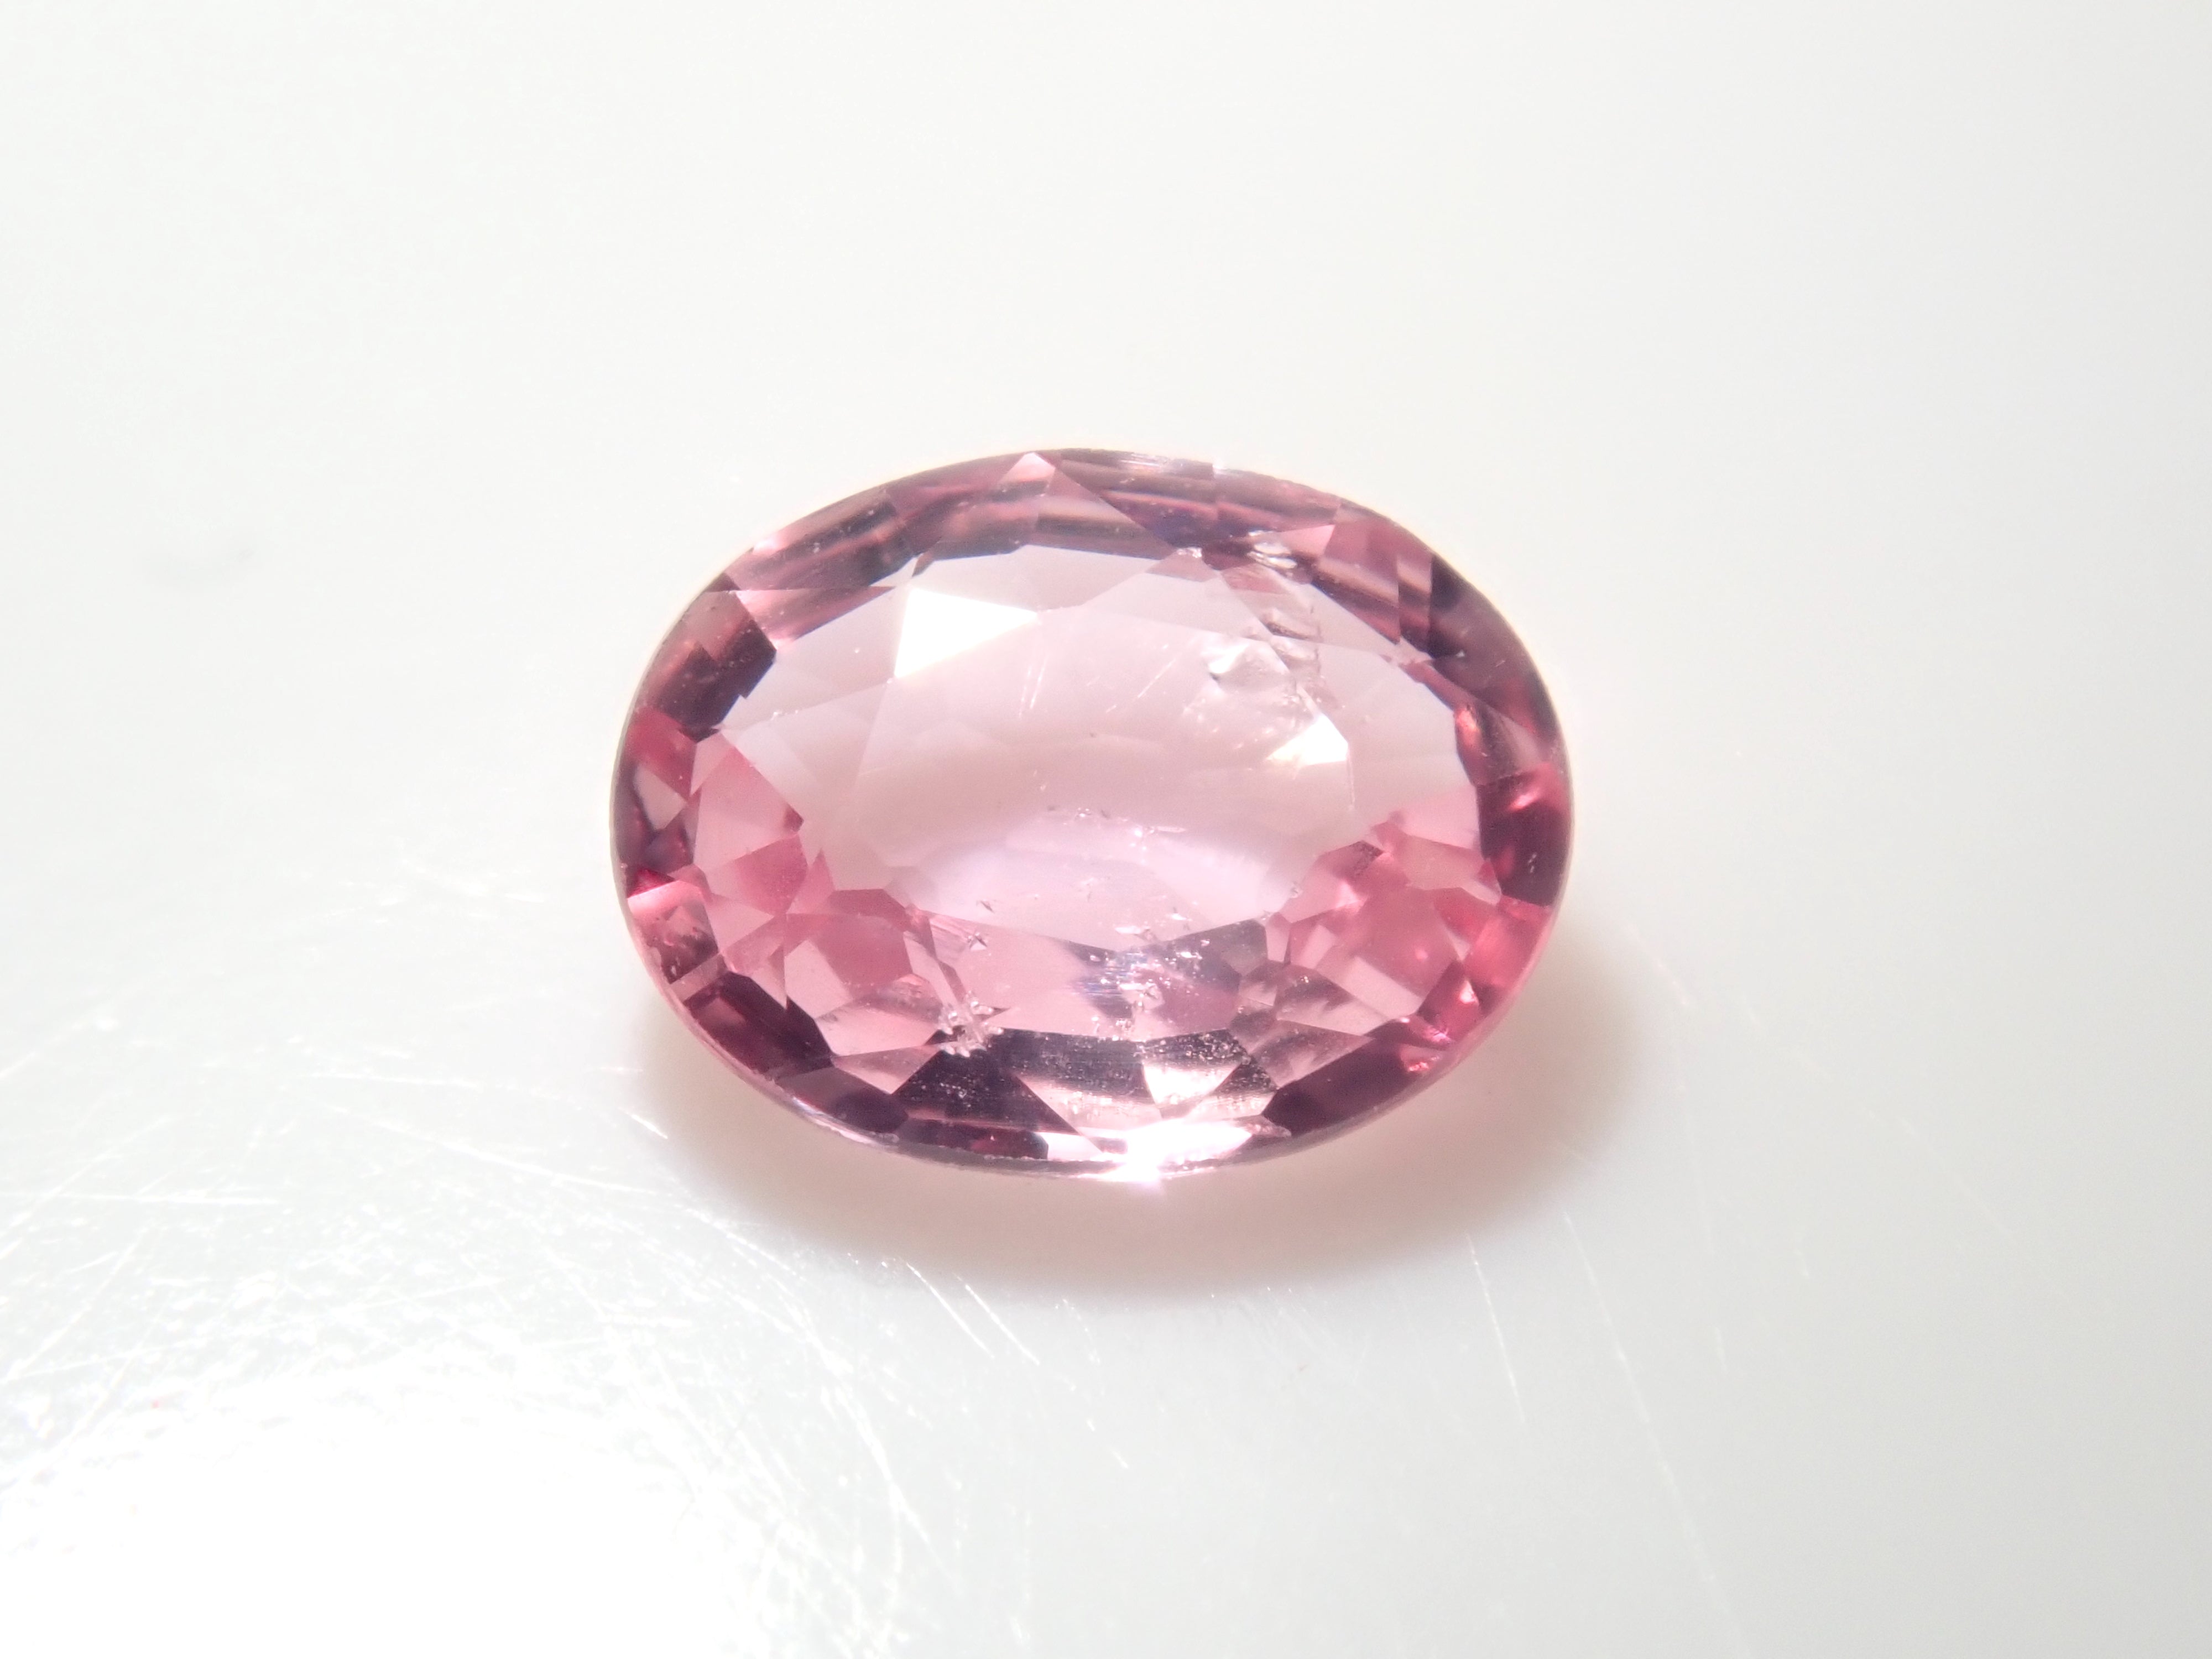 [On sale from 10pm on 8/4] Limited to 4 stones Pink Sapphire Gacha💎 (Only 1 stone is Padparadscha Sapphire 0.215ct with DGL certificate) 1 loose stone [Multiple purchase discounts available]